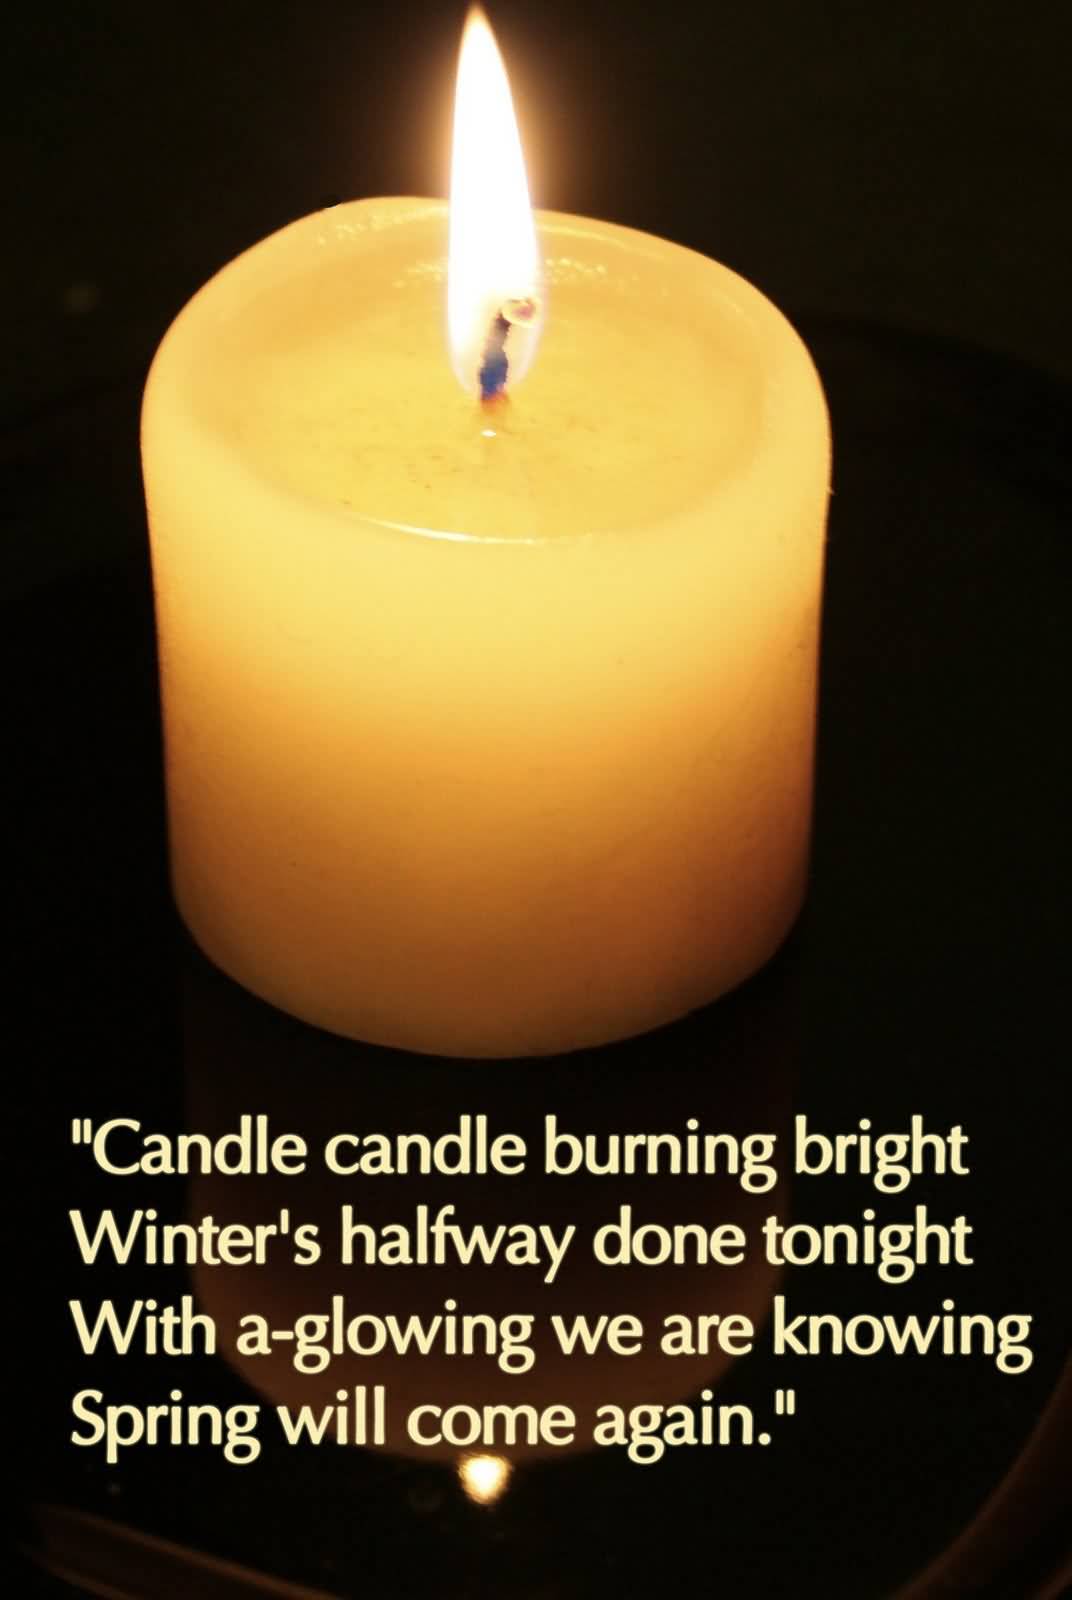 Candle Candle Burning Bright Winter’s Halfway Done Tonight With A Glowing We Are Knowing Spring Will Come Again